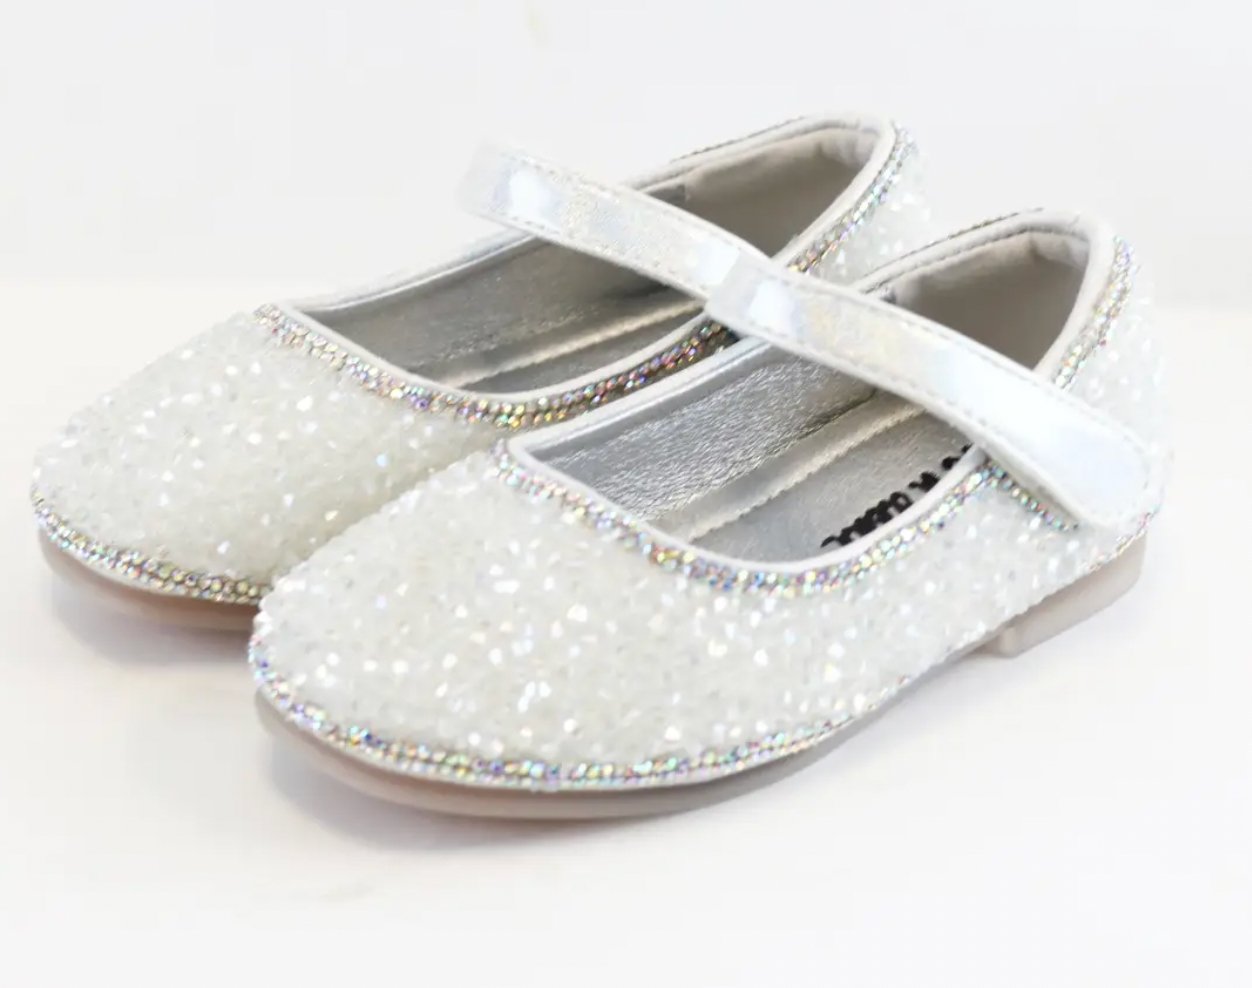 silver dress shoes for women